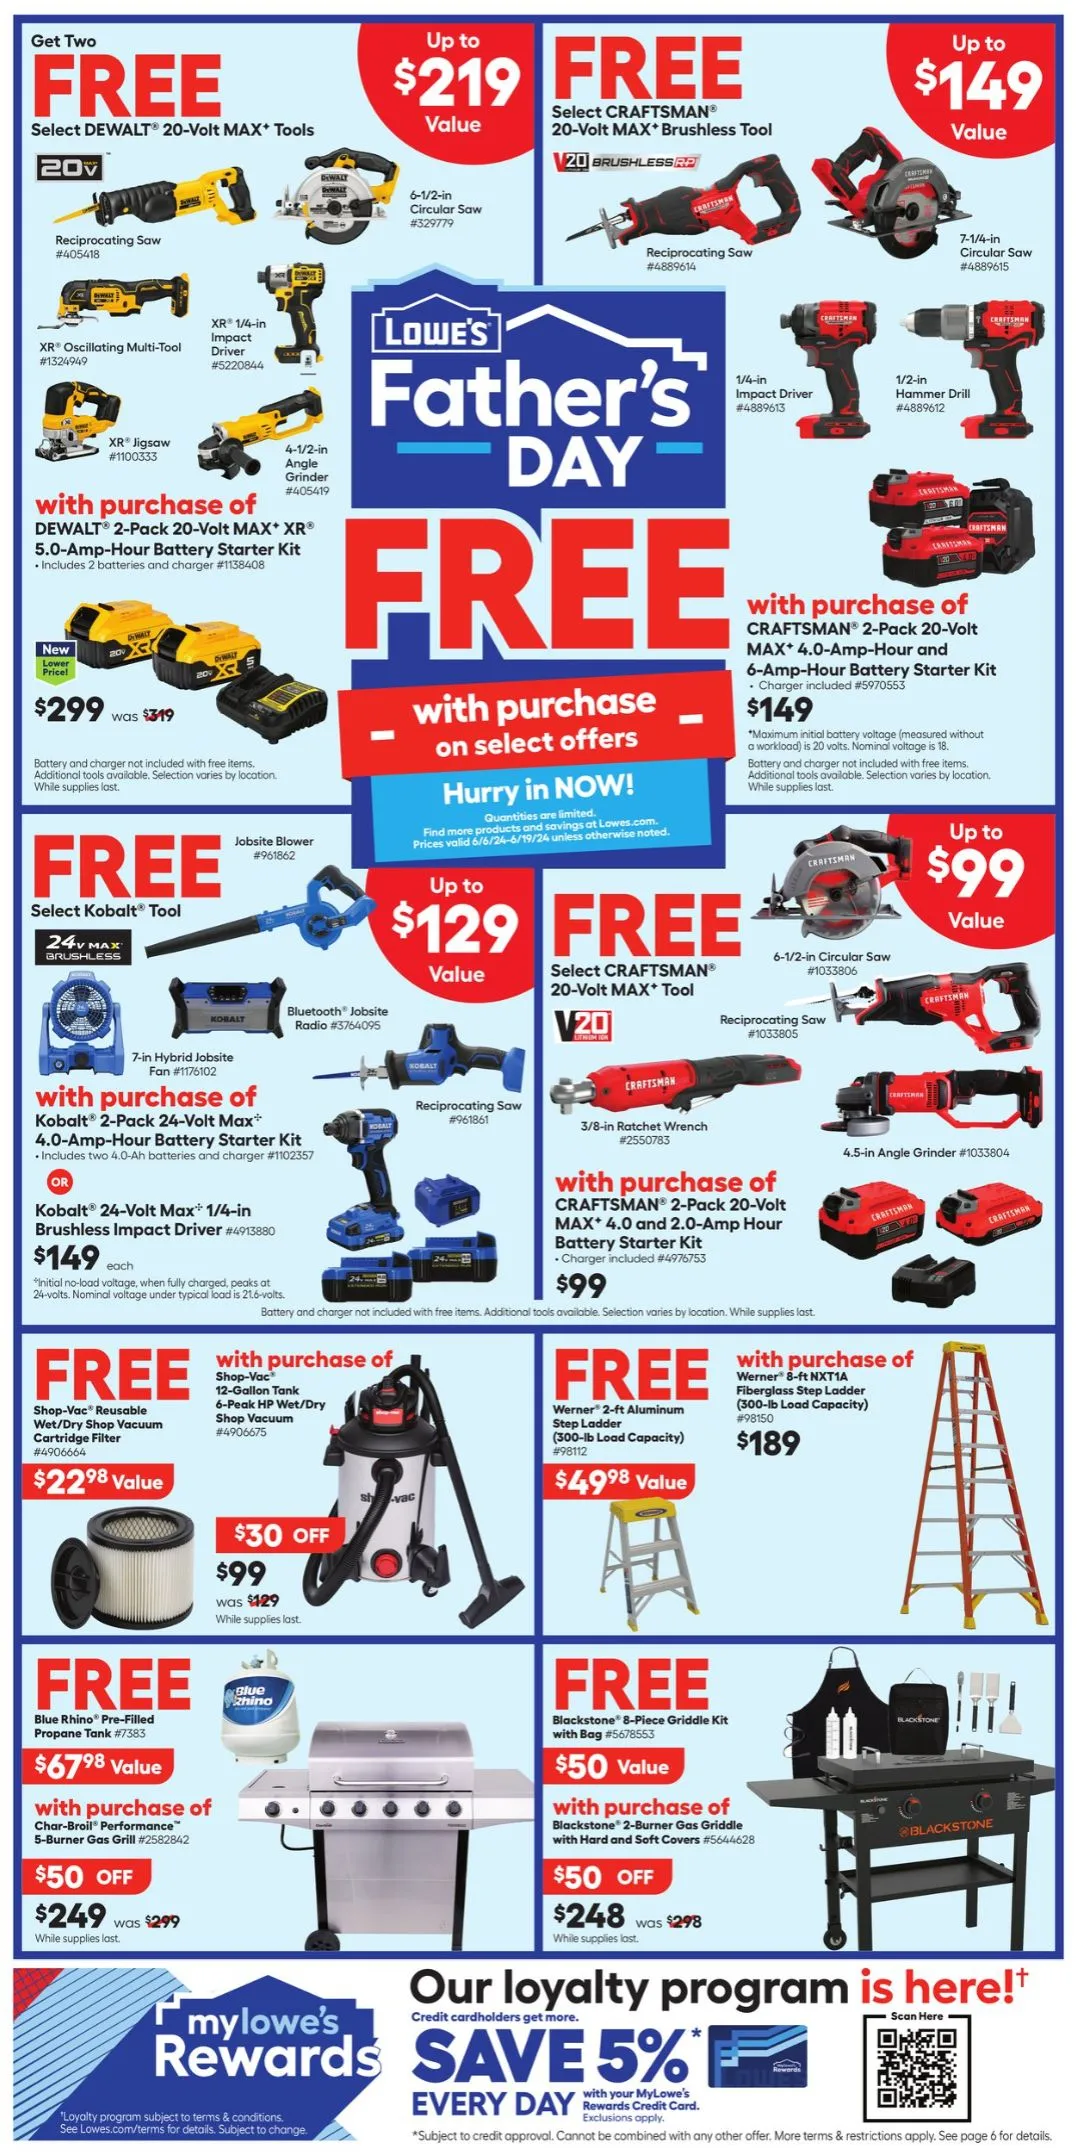 Lowe's July 2024 Weekly Sales, Deals, Discounts and Digital Coupons.